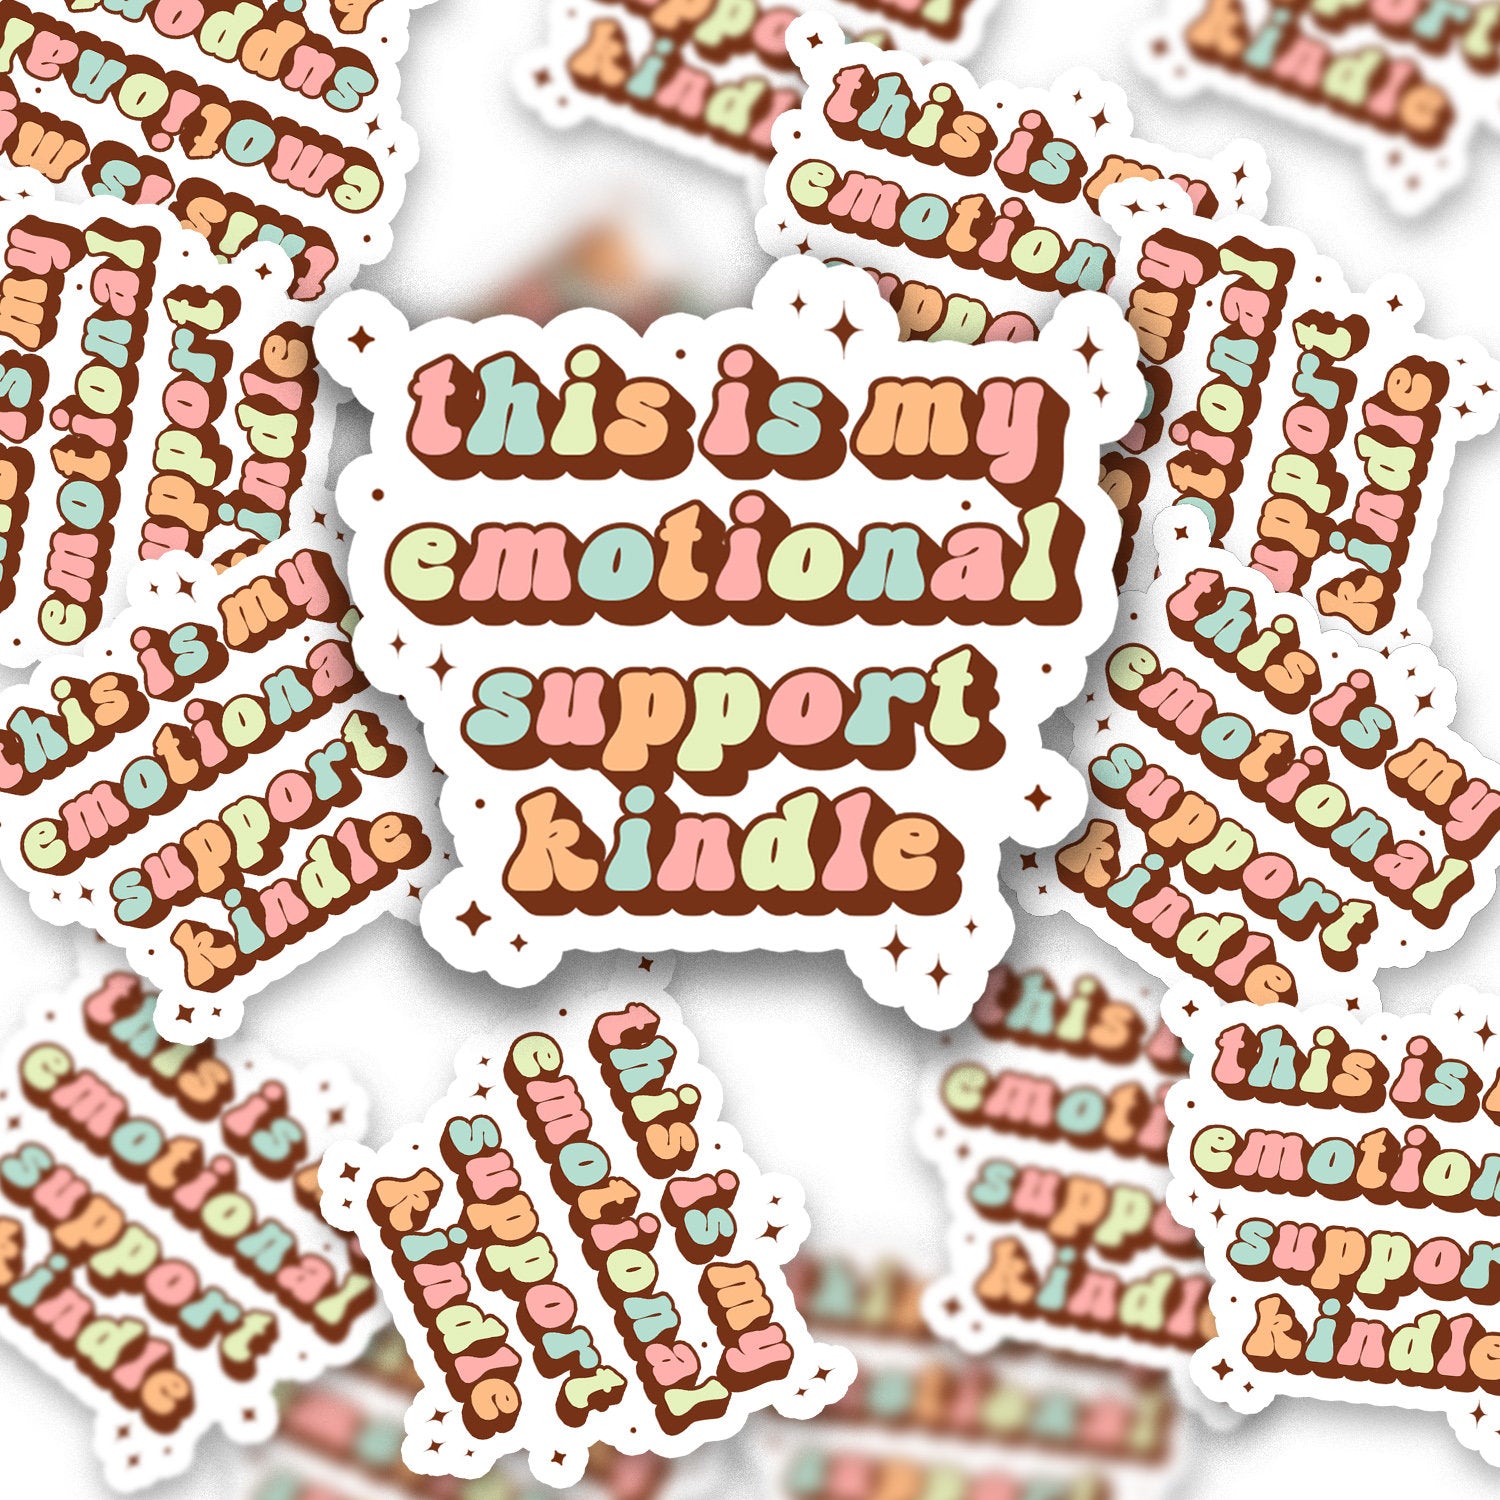 This Is My Emotional Support Kindle Sticker, bookish, kindle stickers, books lover gifts, books sticker, smut stickers